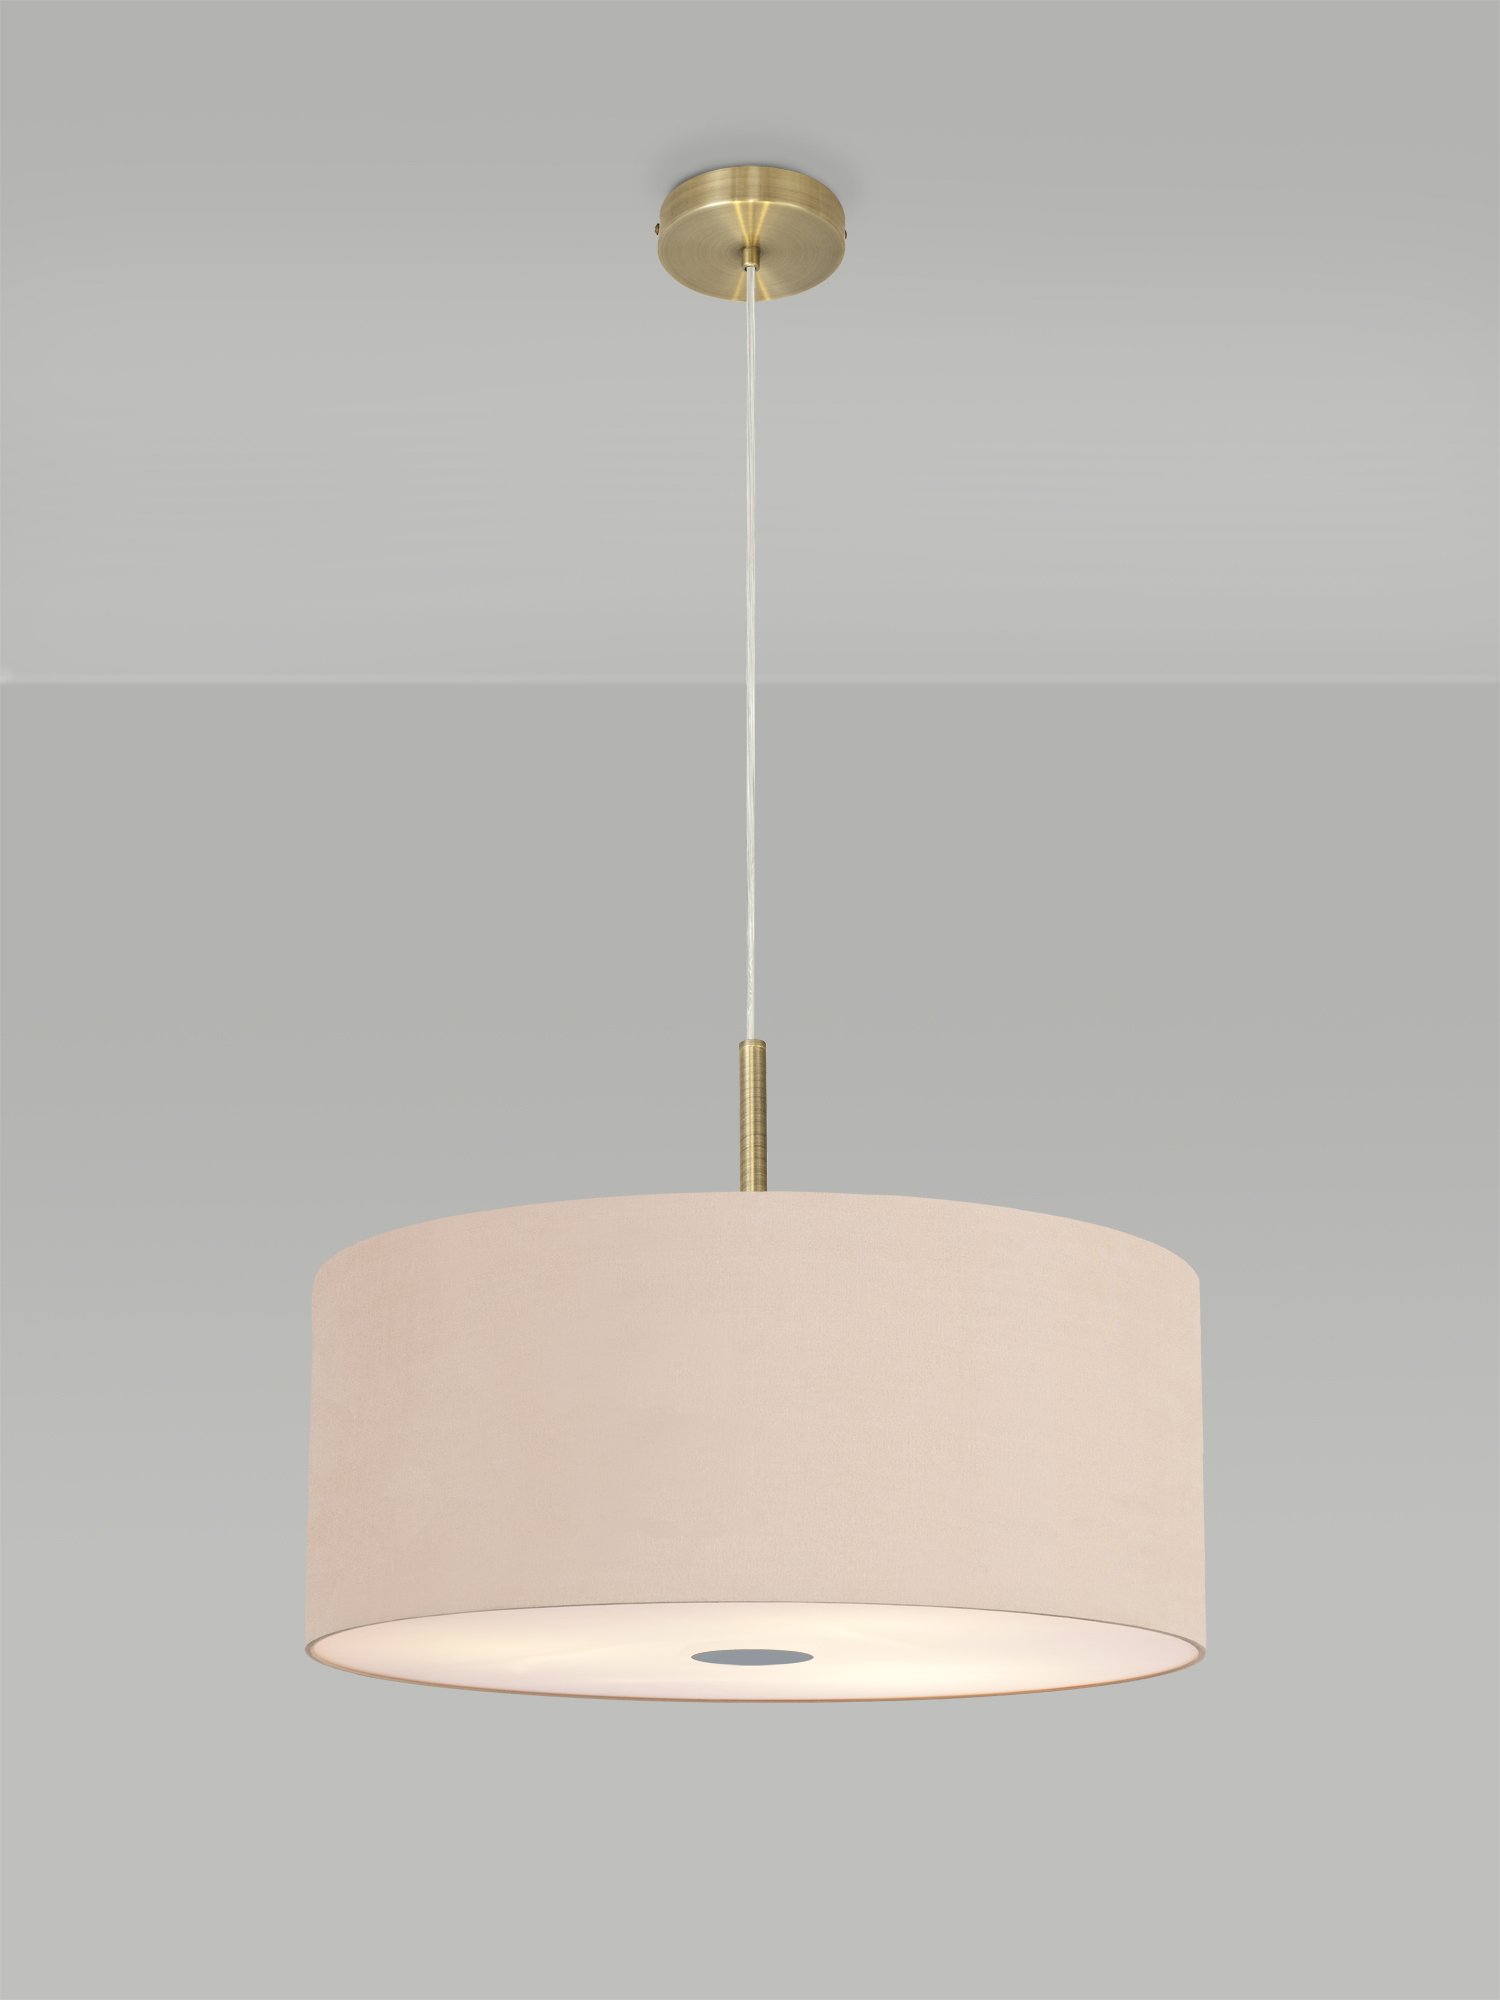 Baymont 60cm 5 Light Pendant Antique Brass; Antique Gold/Ruby; Frosted Diffuser DK0522  Deco Baymont AB AG